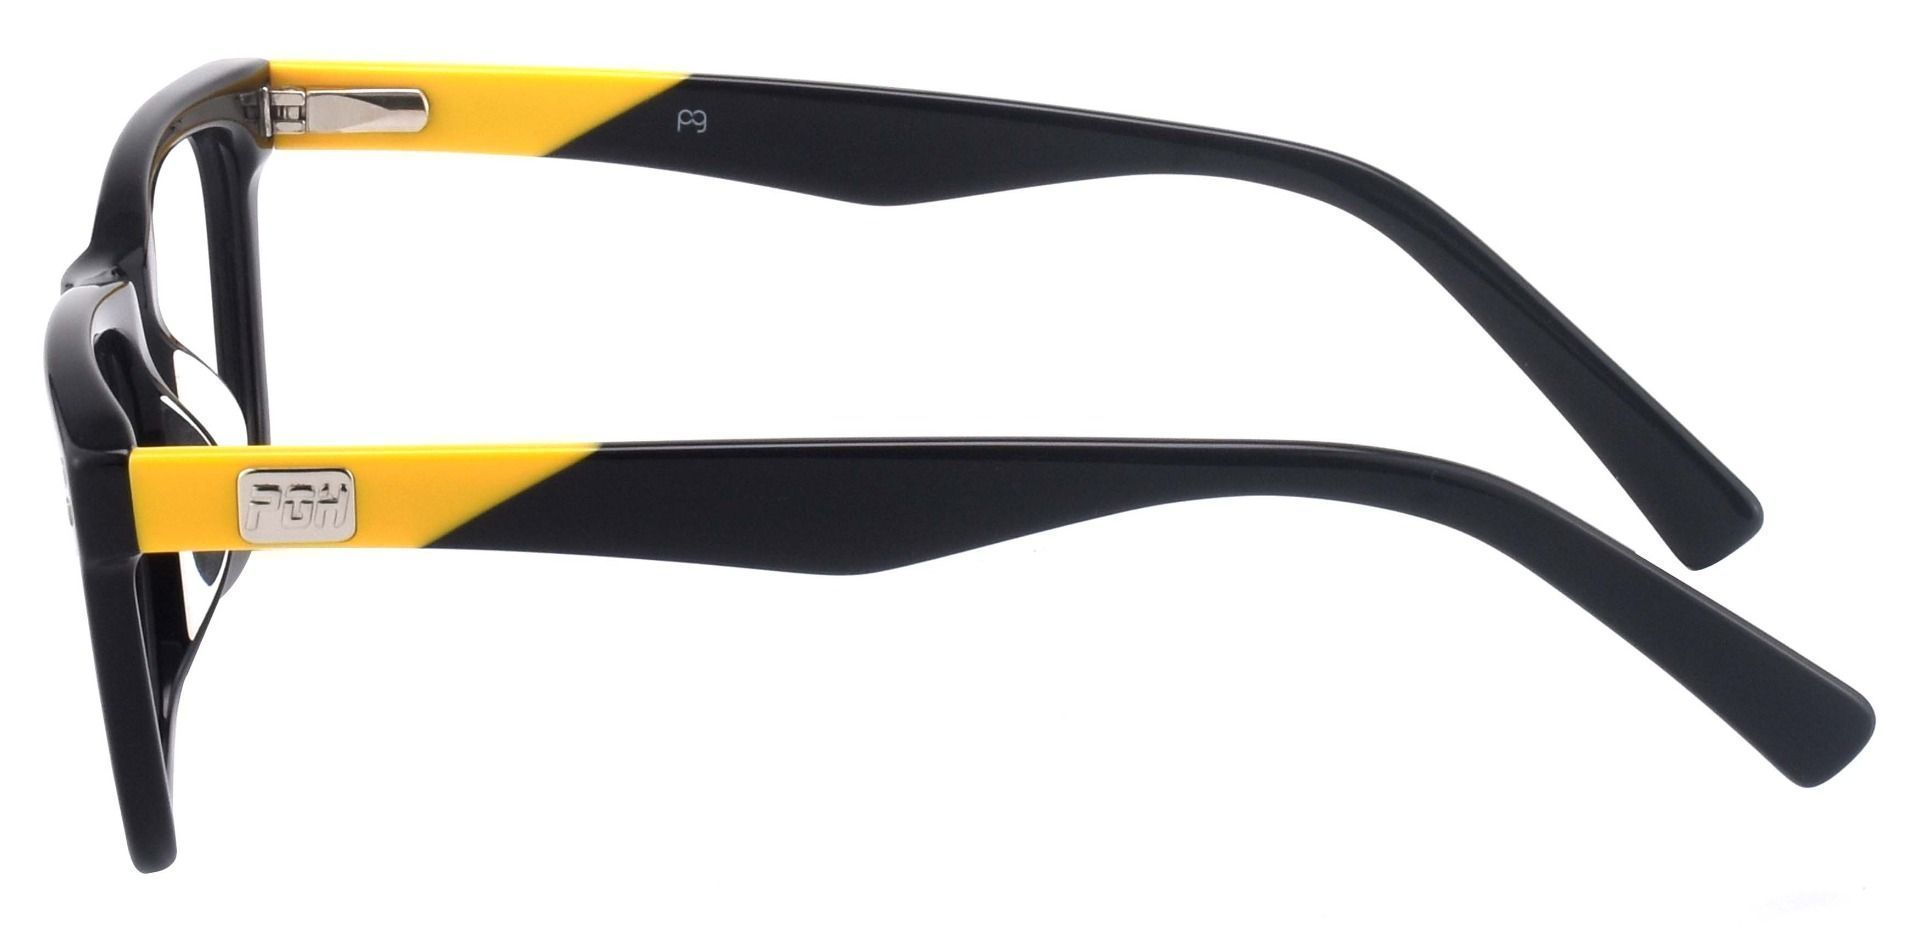 Liberty Rectangle Reading Glasses - The Frame Is Black And Gold